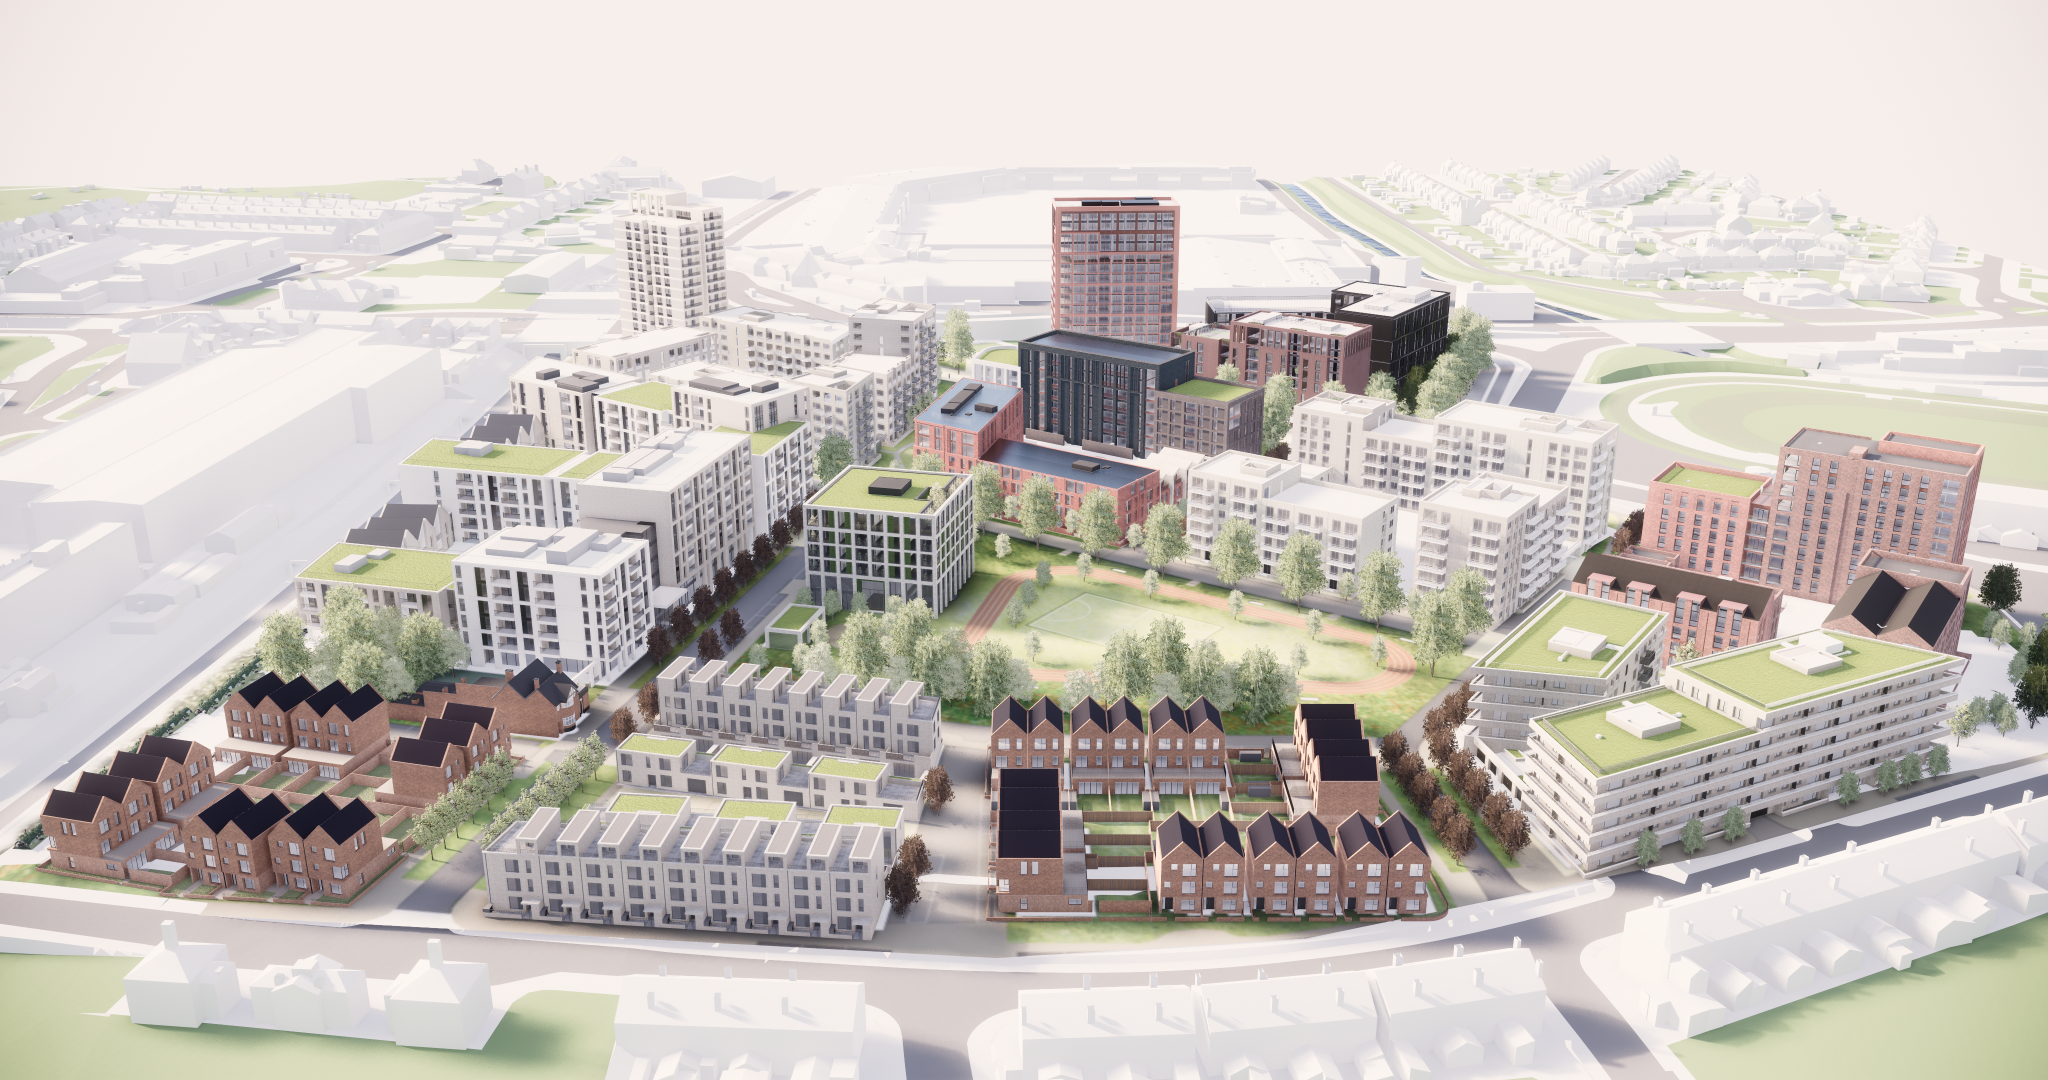 Britain's Government is set to provide £165 million funding for the 2022 Commonwealth Games Athletes' Village ©Birmingham 2022